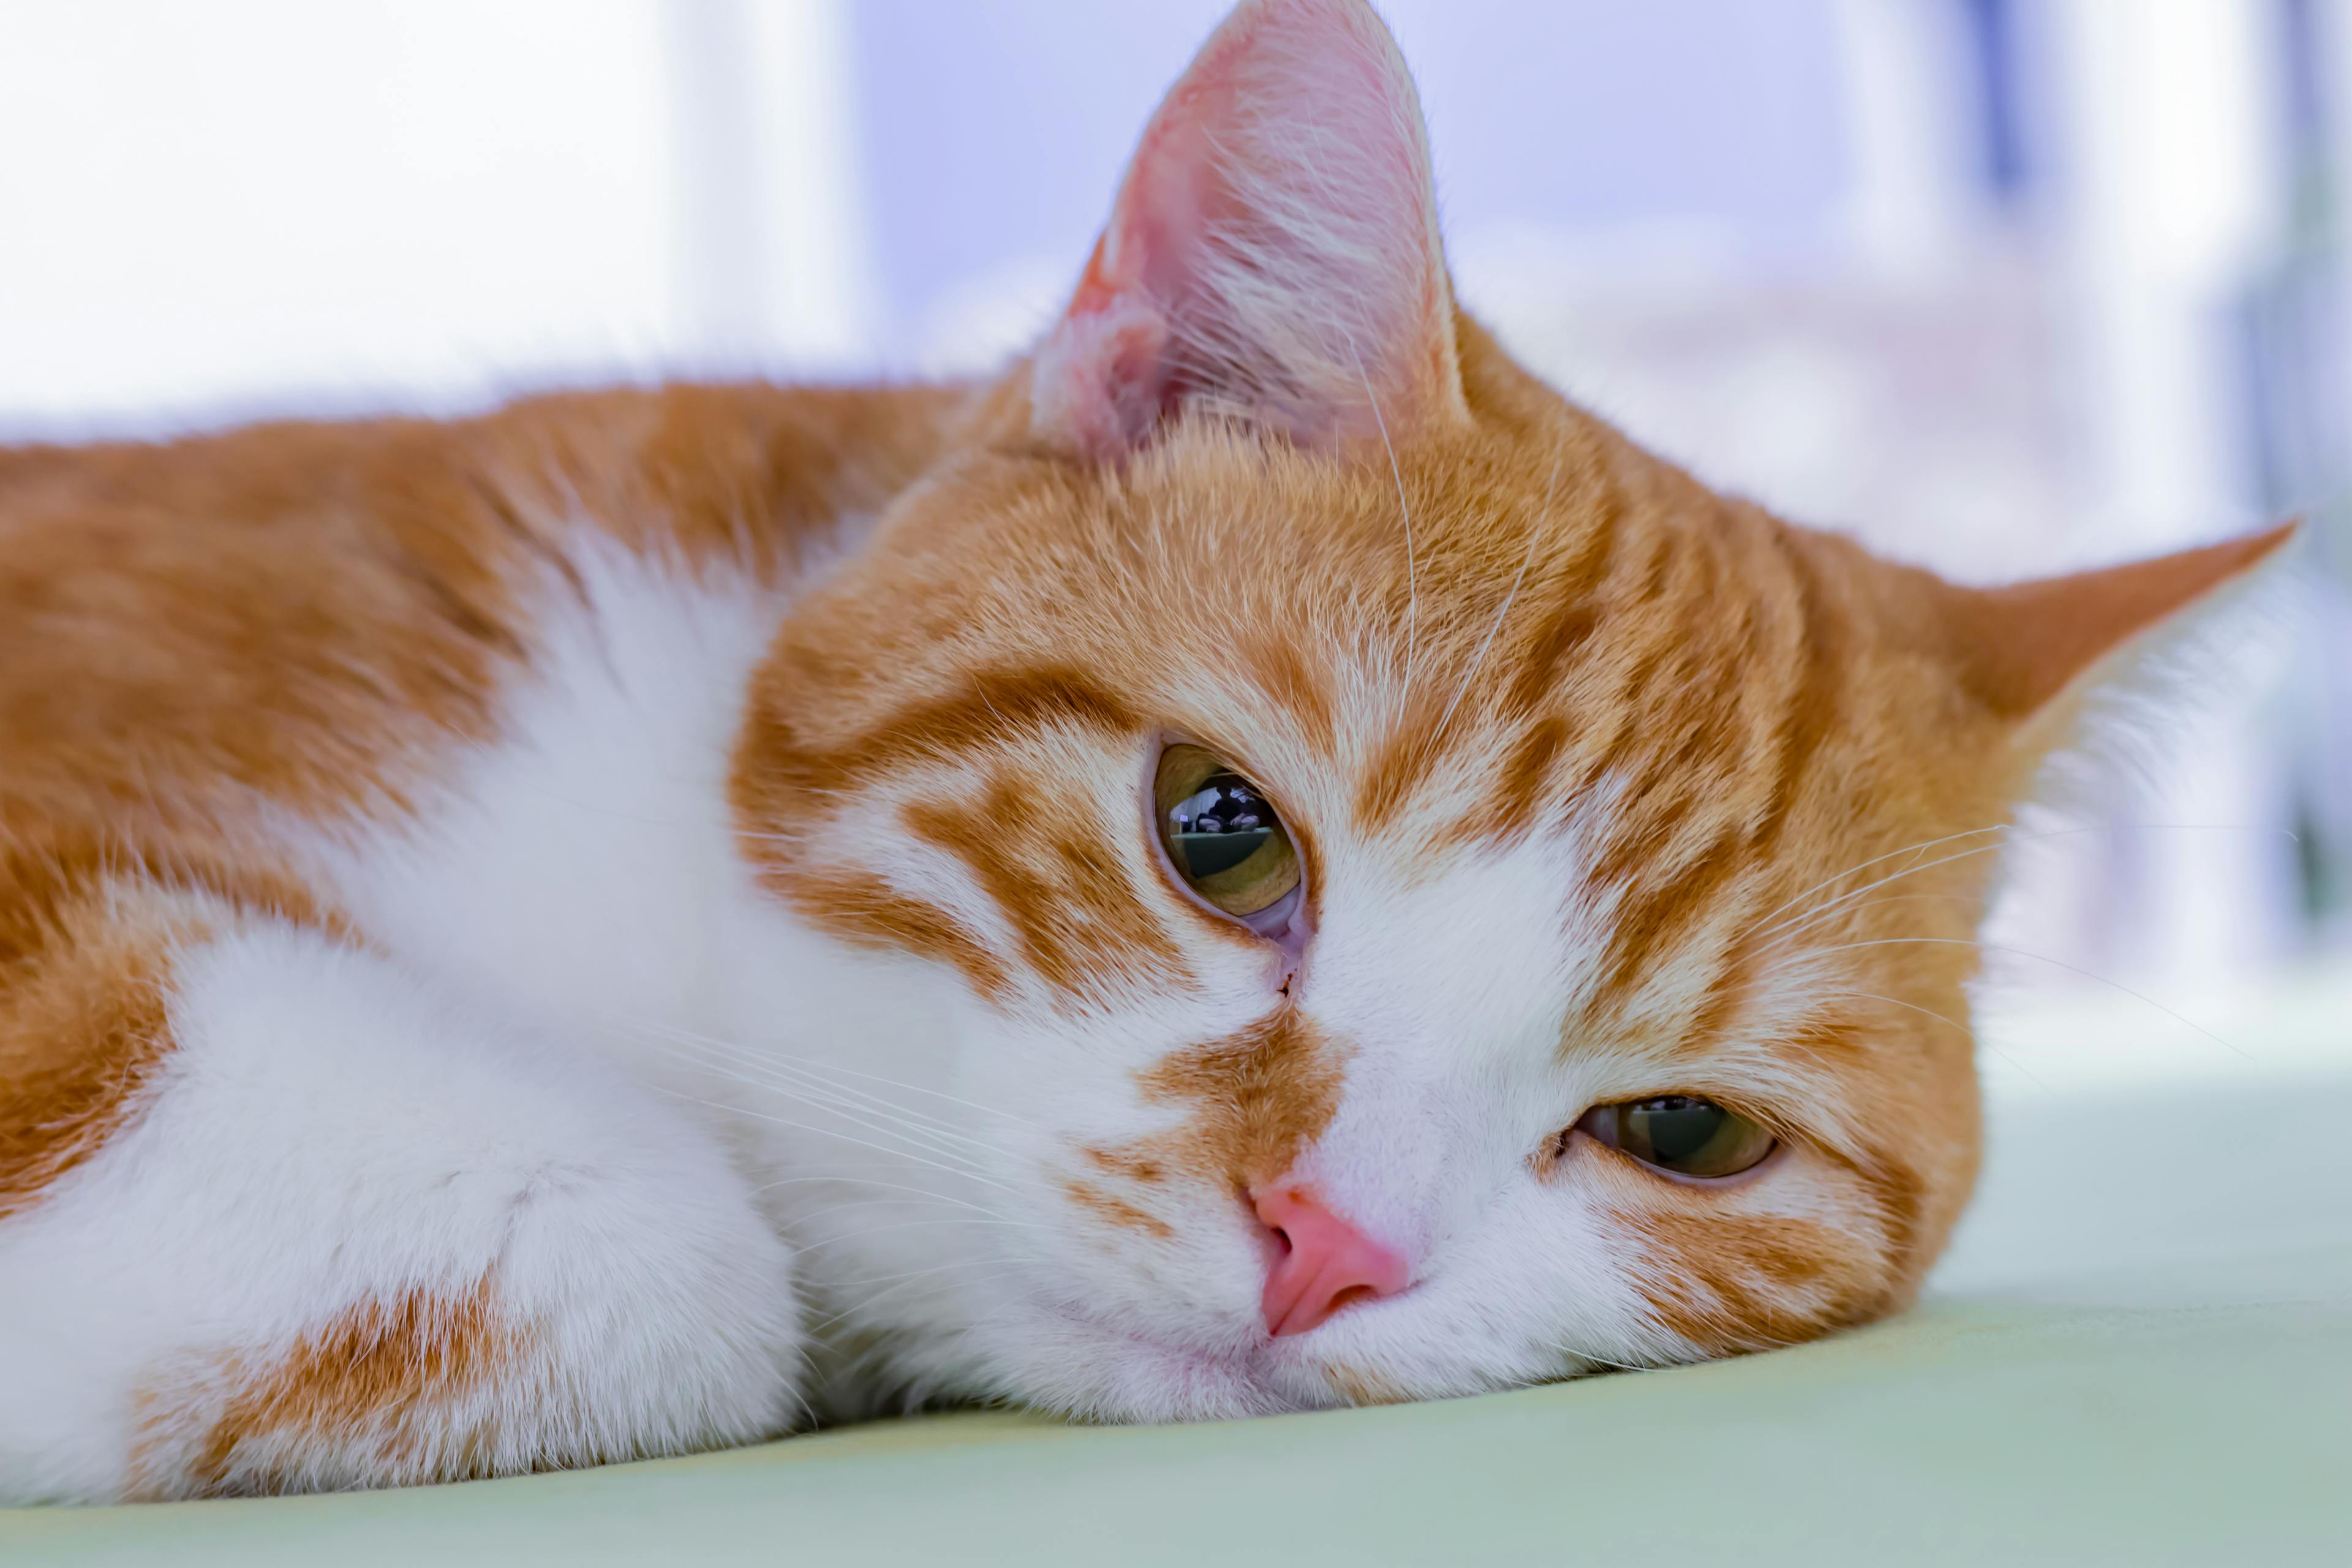 Feline panleukopenia virus (FPV), also known as distemper in cats, is a highly contagious, life-threatening condition caused by a parvovirus. Learn how to spot the symptoms.